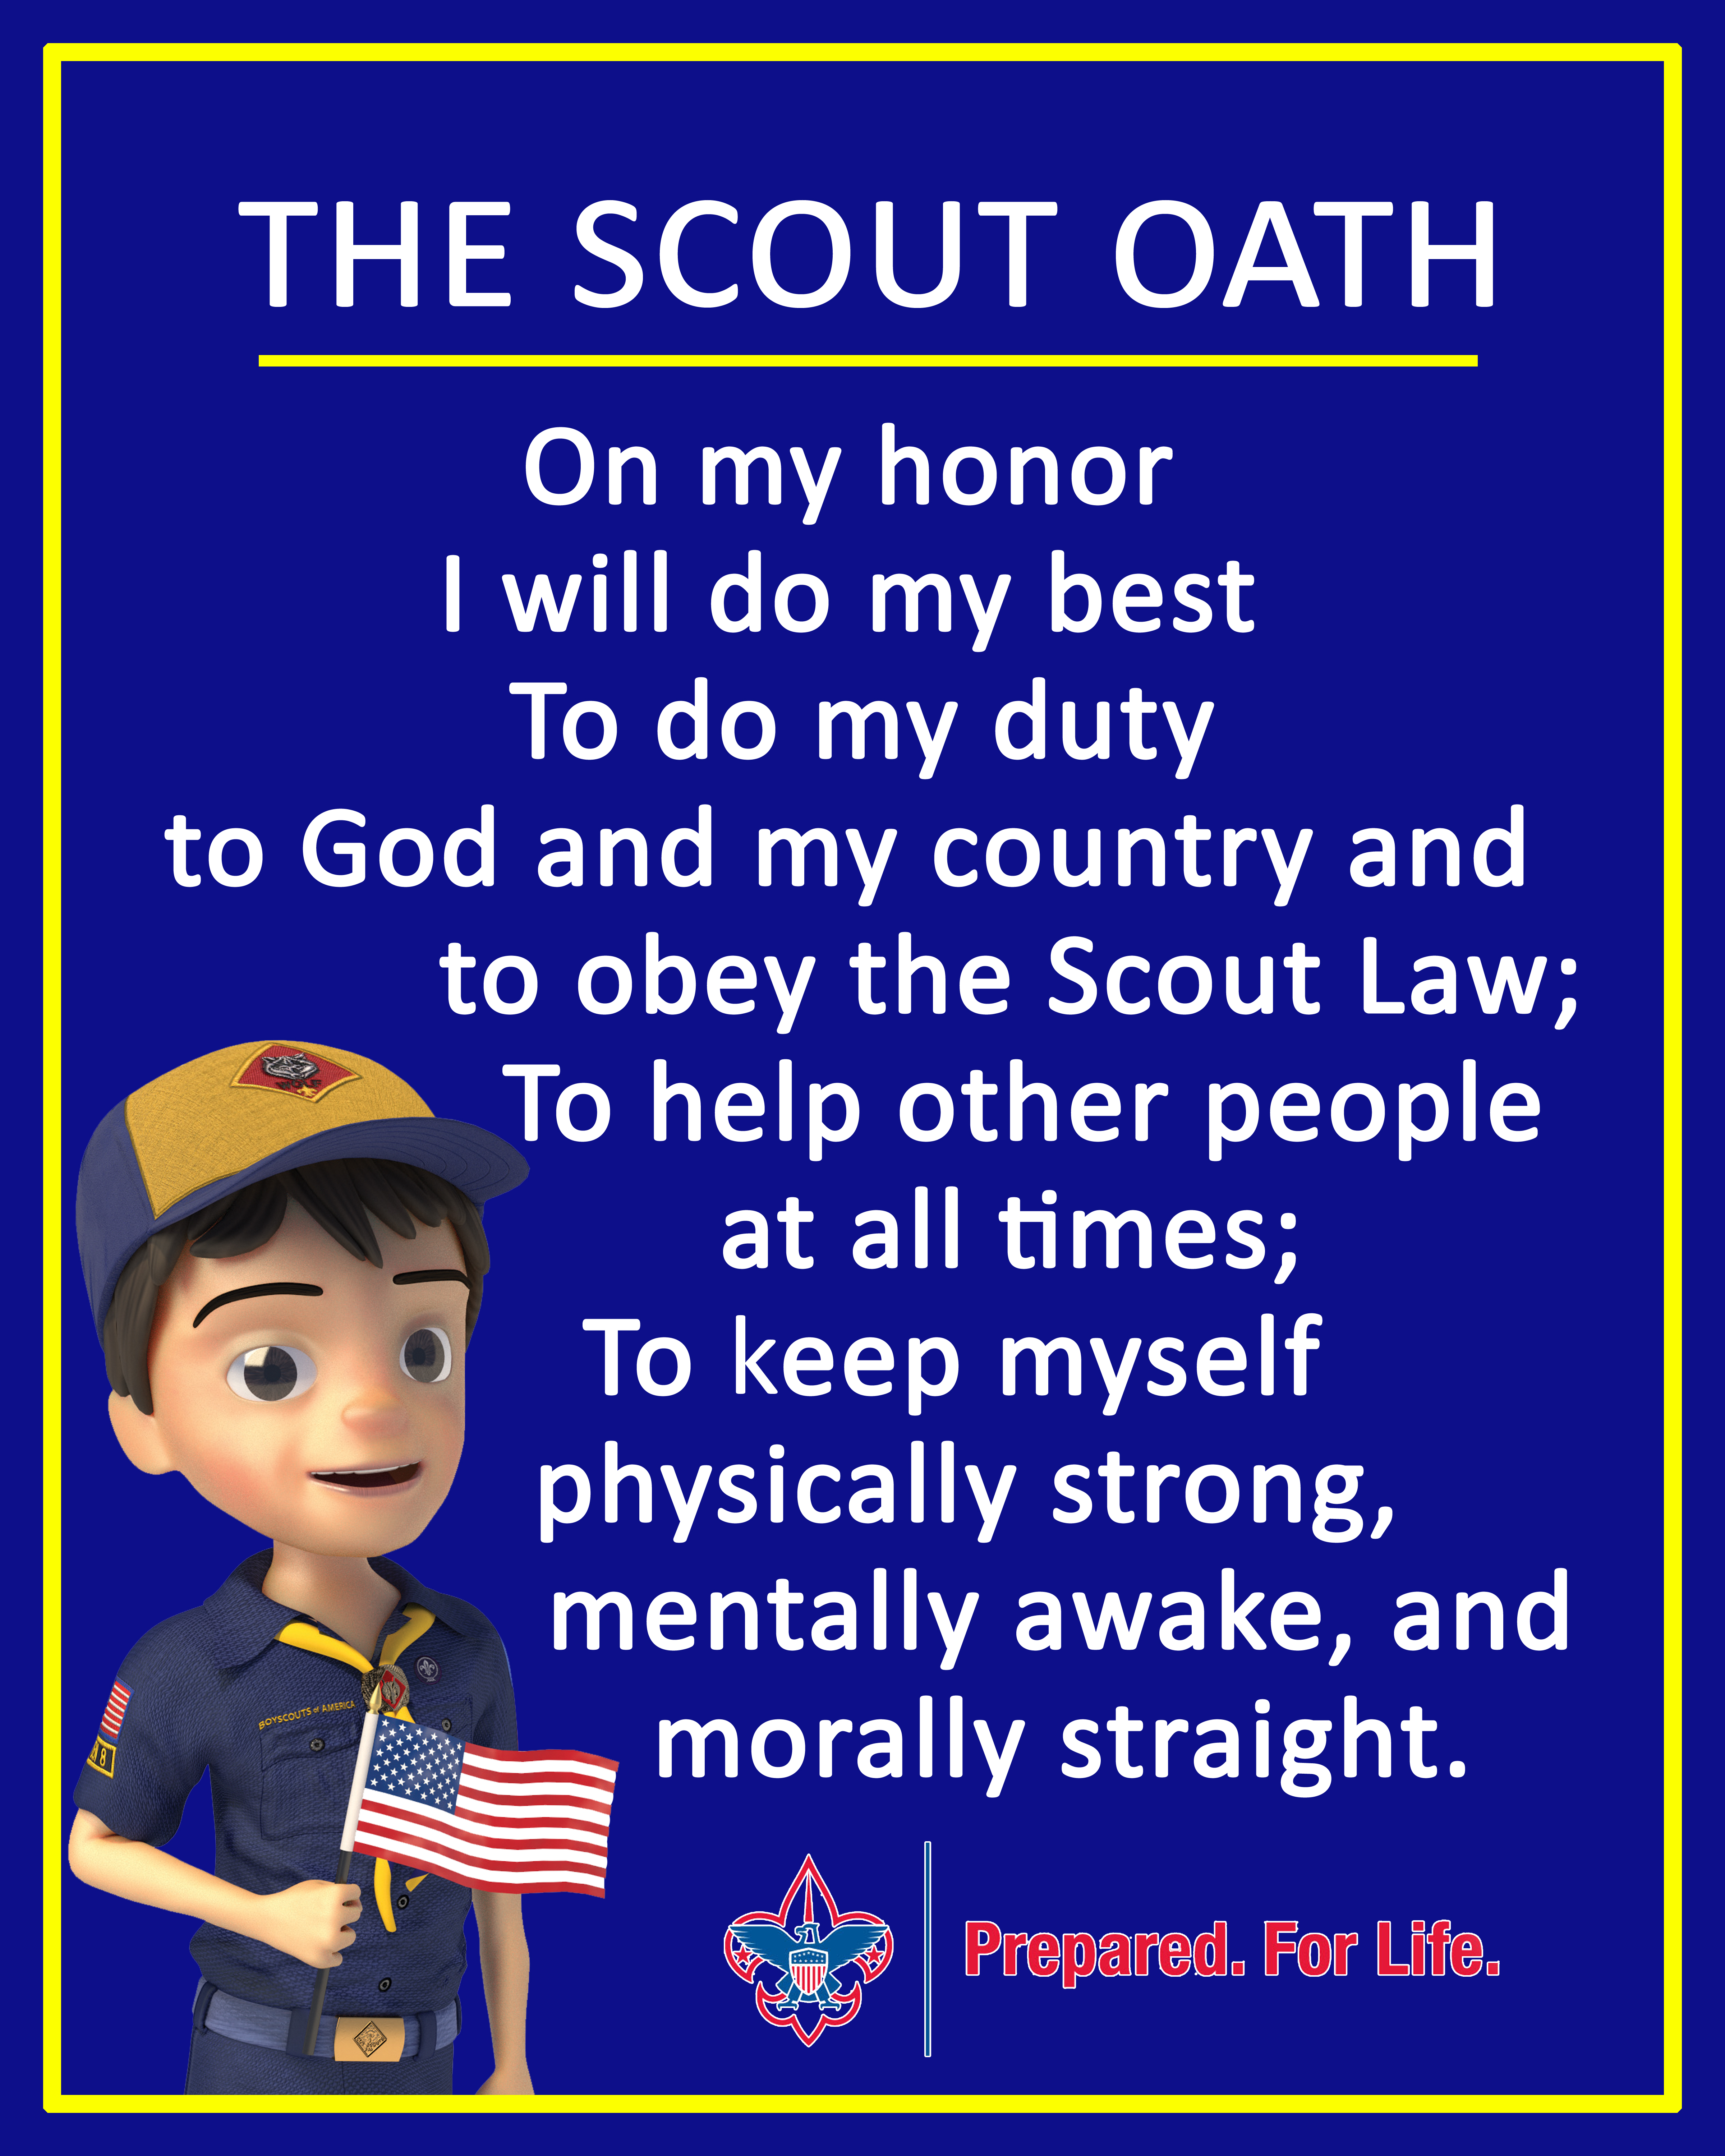 Scout Oath And Law Printable